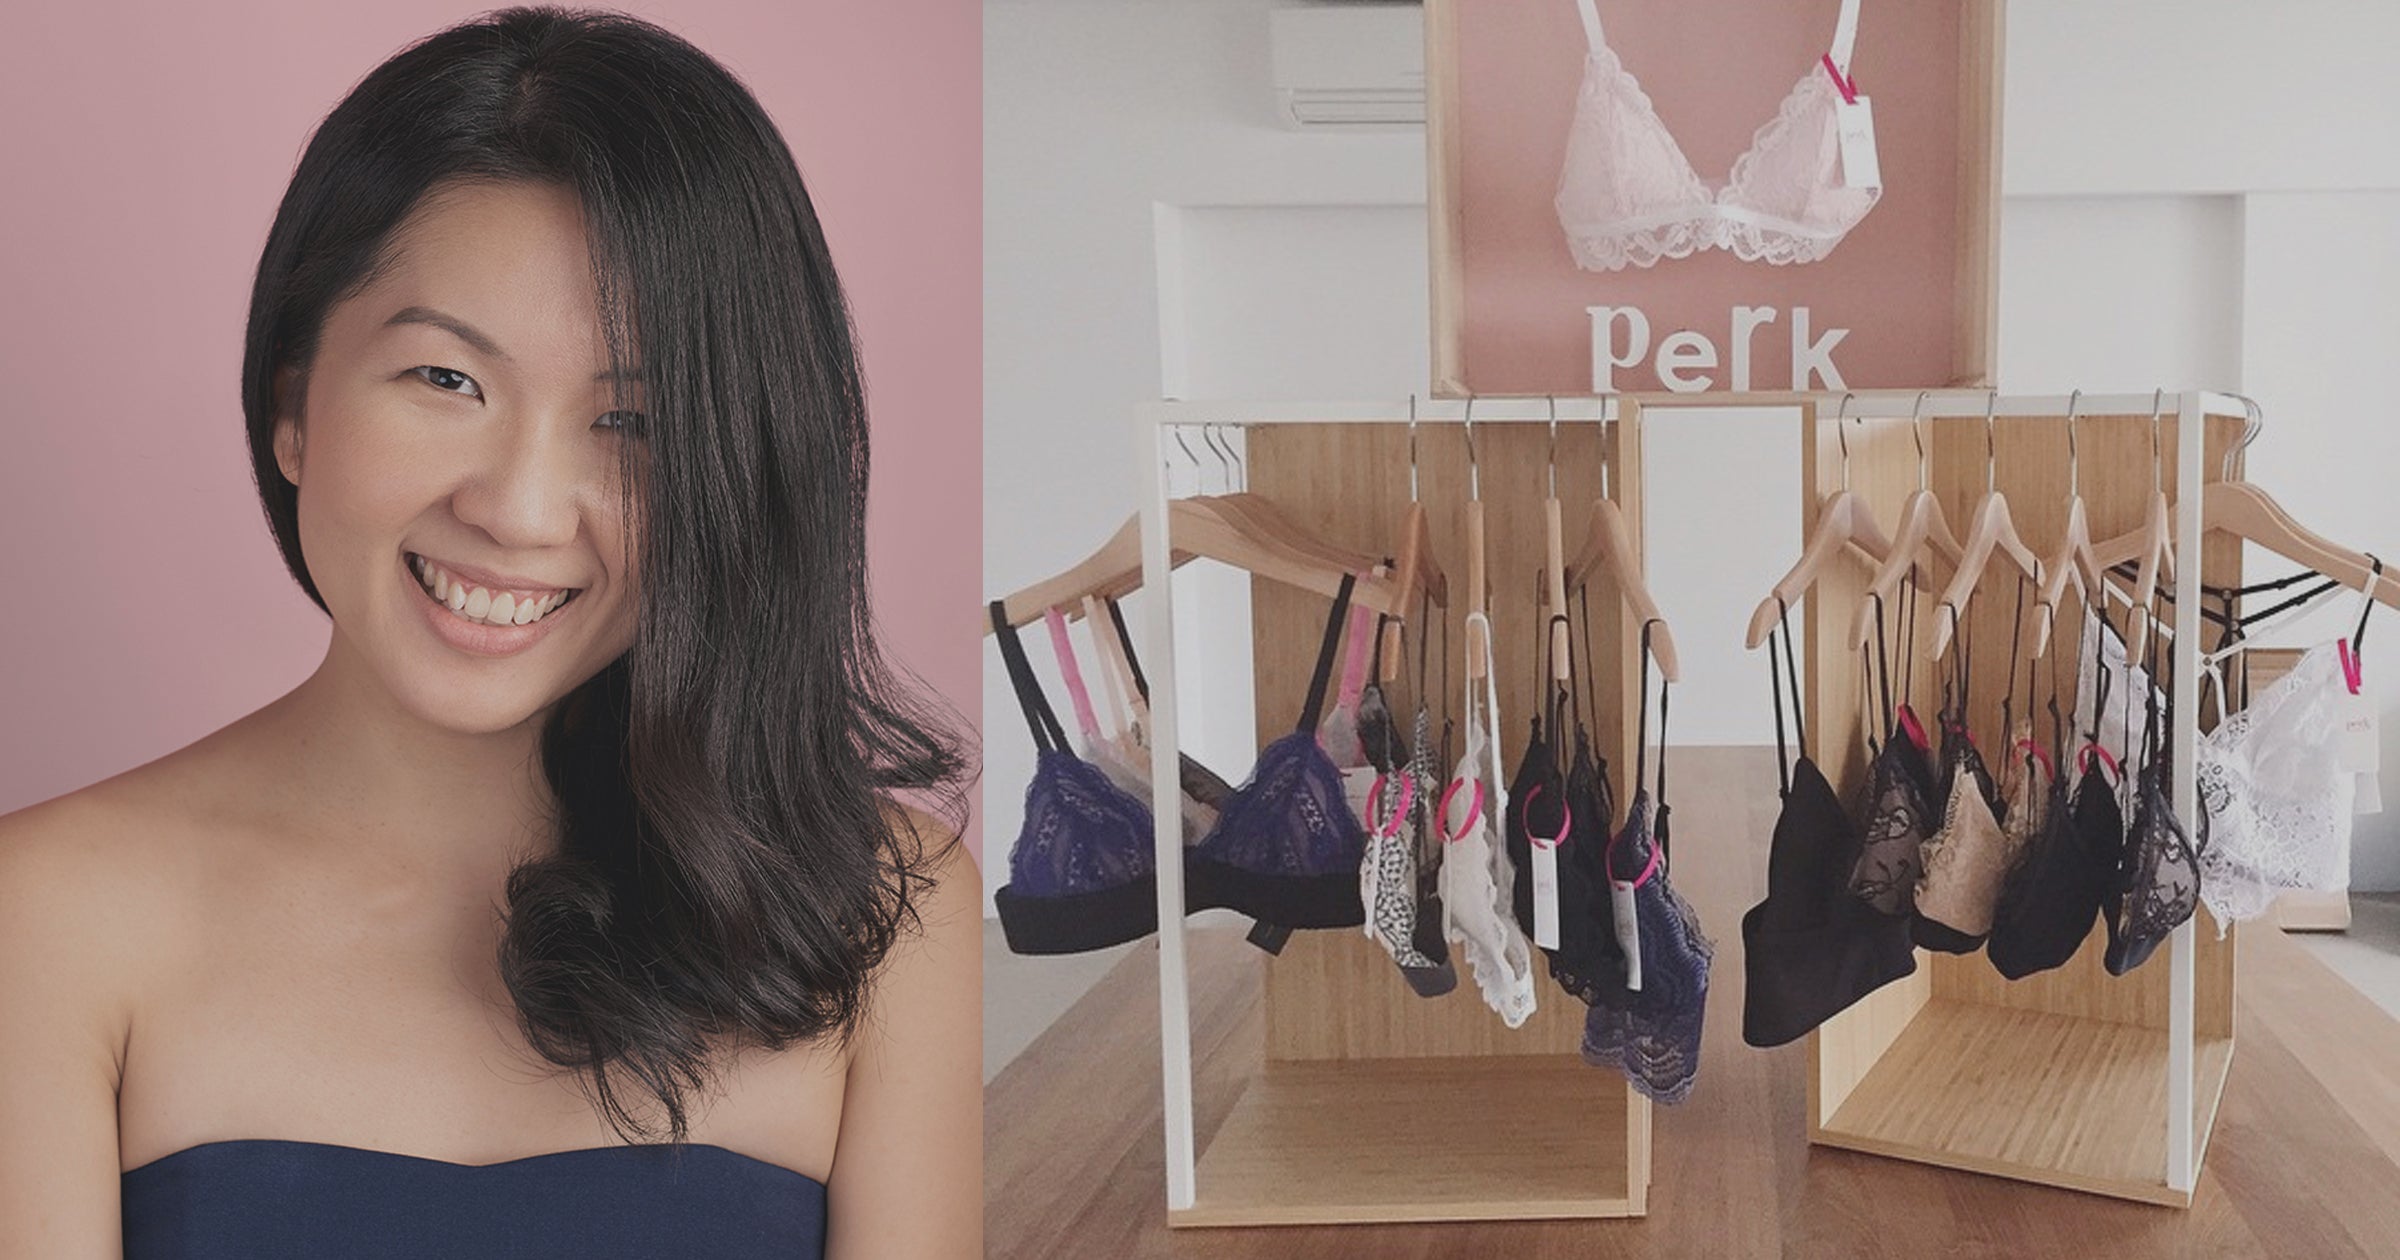 On The Vulcan Post: The Lingerie Industry Here Is Worth Over $200M - Here's How A S'porean Is Banking On These Perks